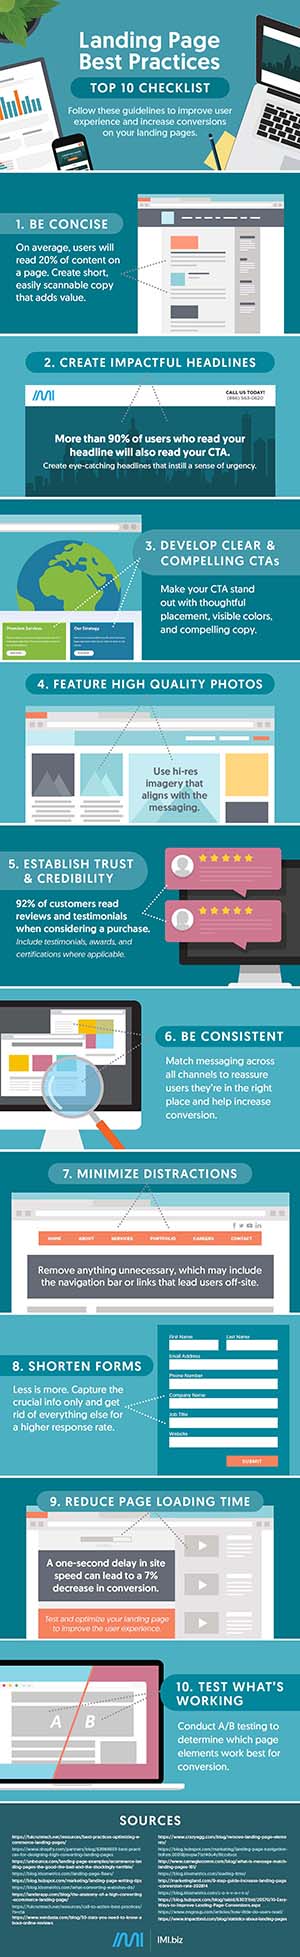 REQ IMI Landing Page Best Practices Infographic